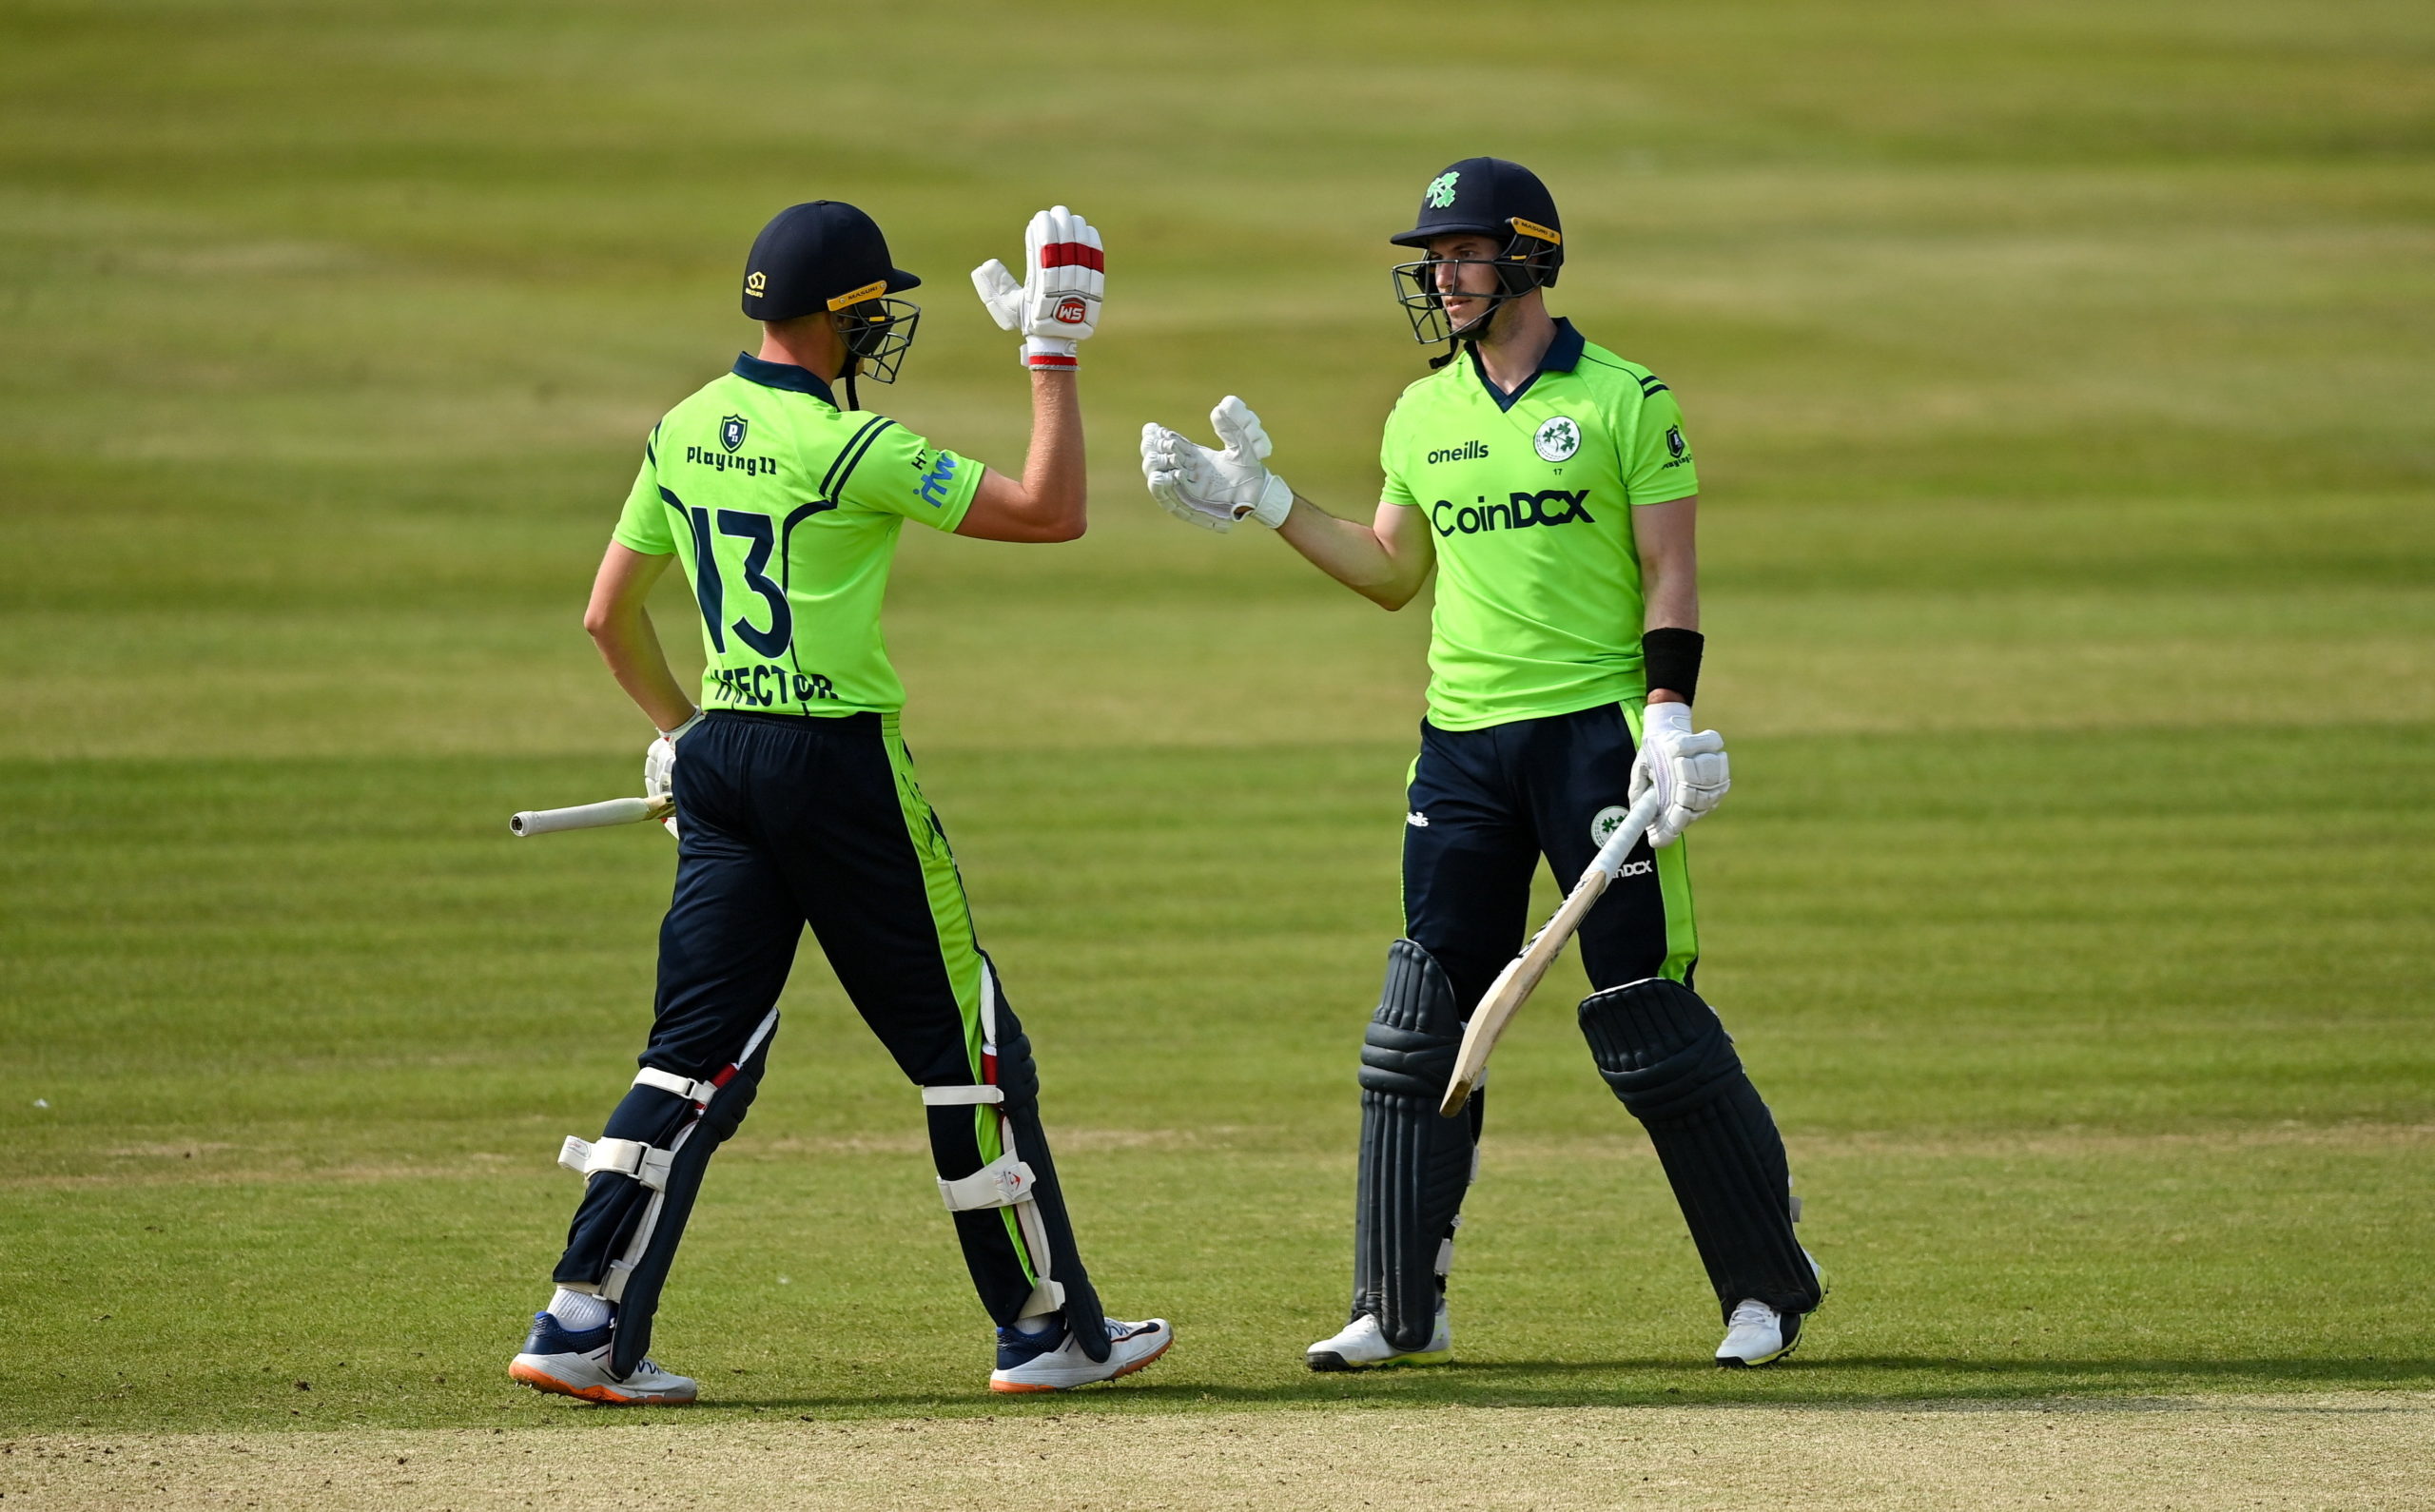 Cricket Ireland: Ireland Men to play three T20Is against UAE in Dubai ahead of the T20 World Cup